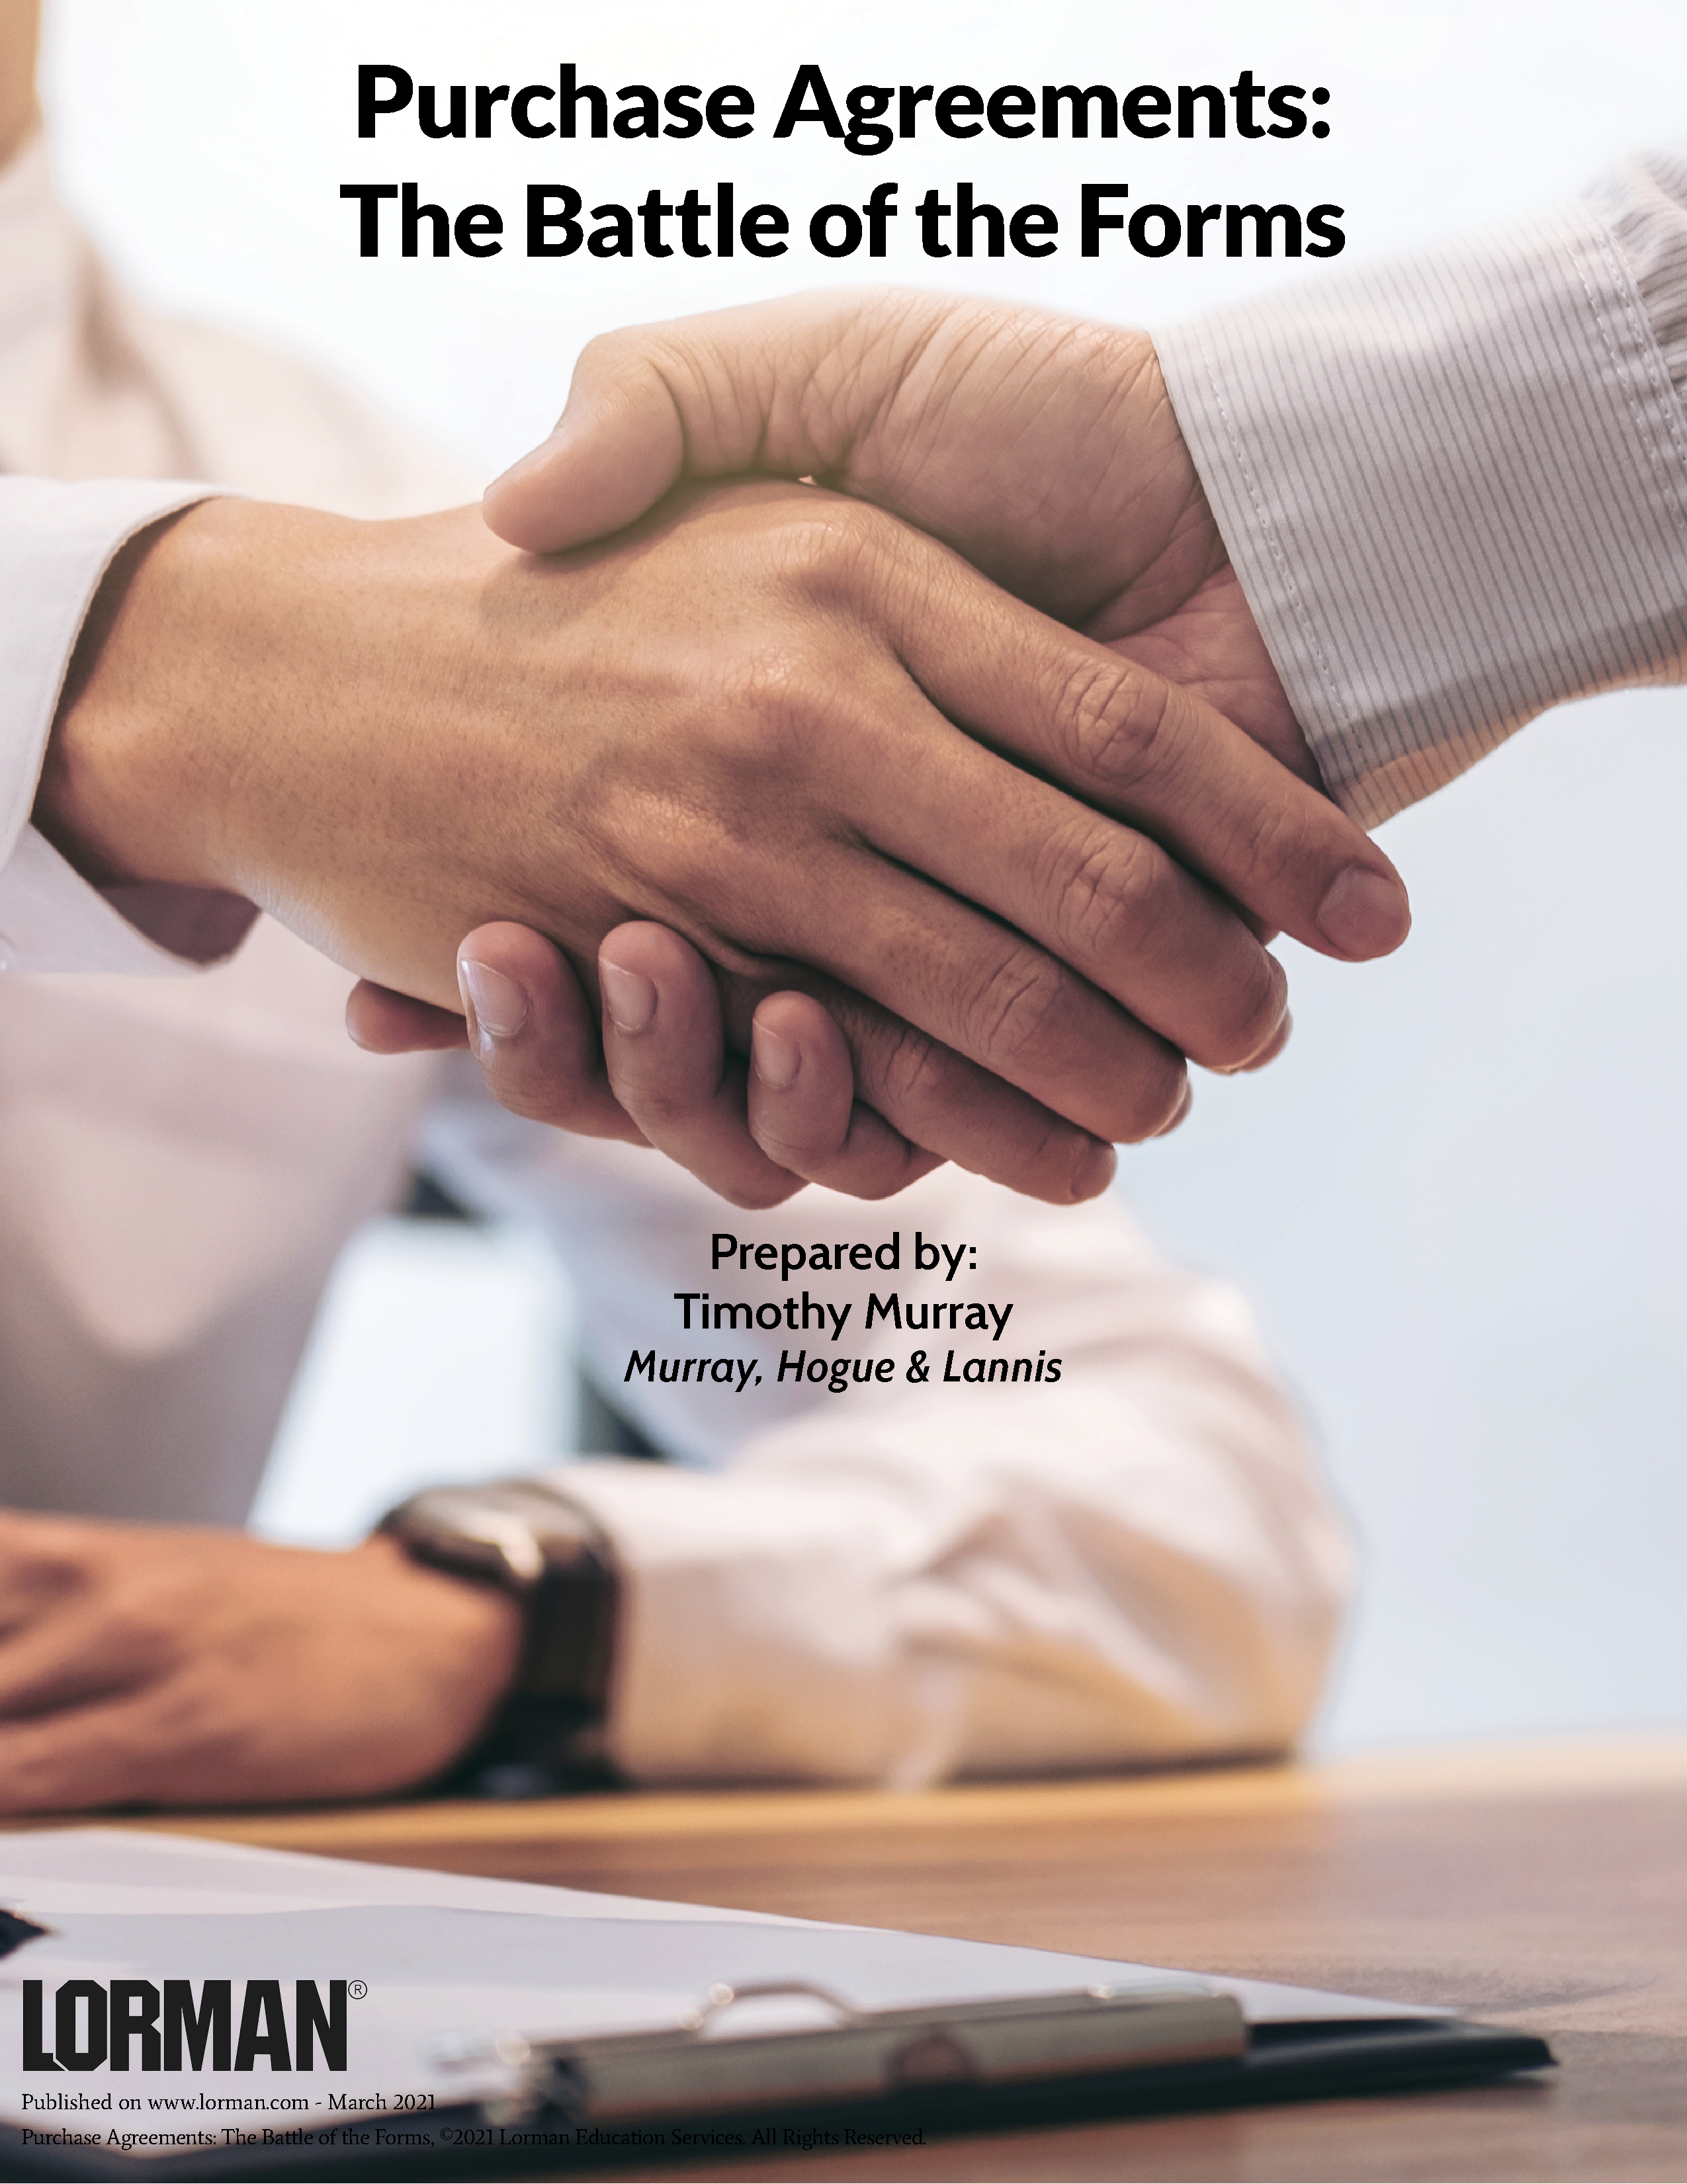 Purchase Agreements: The Battle of the Forms